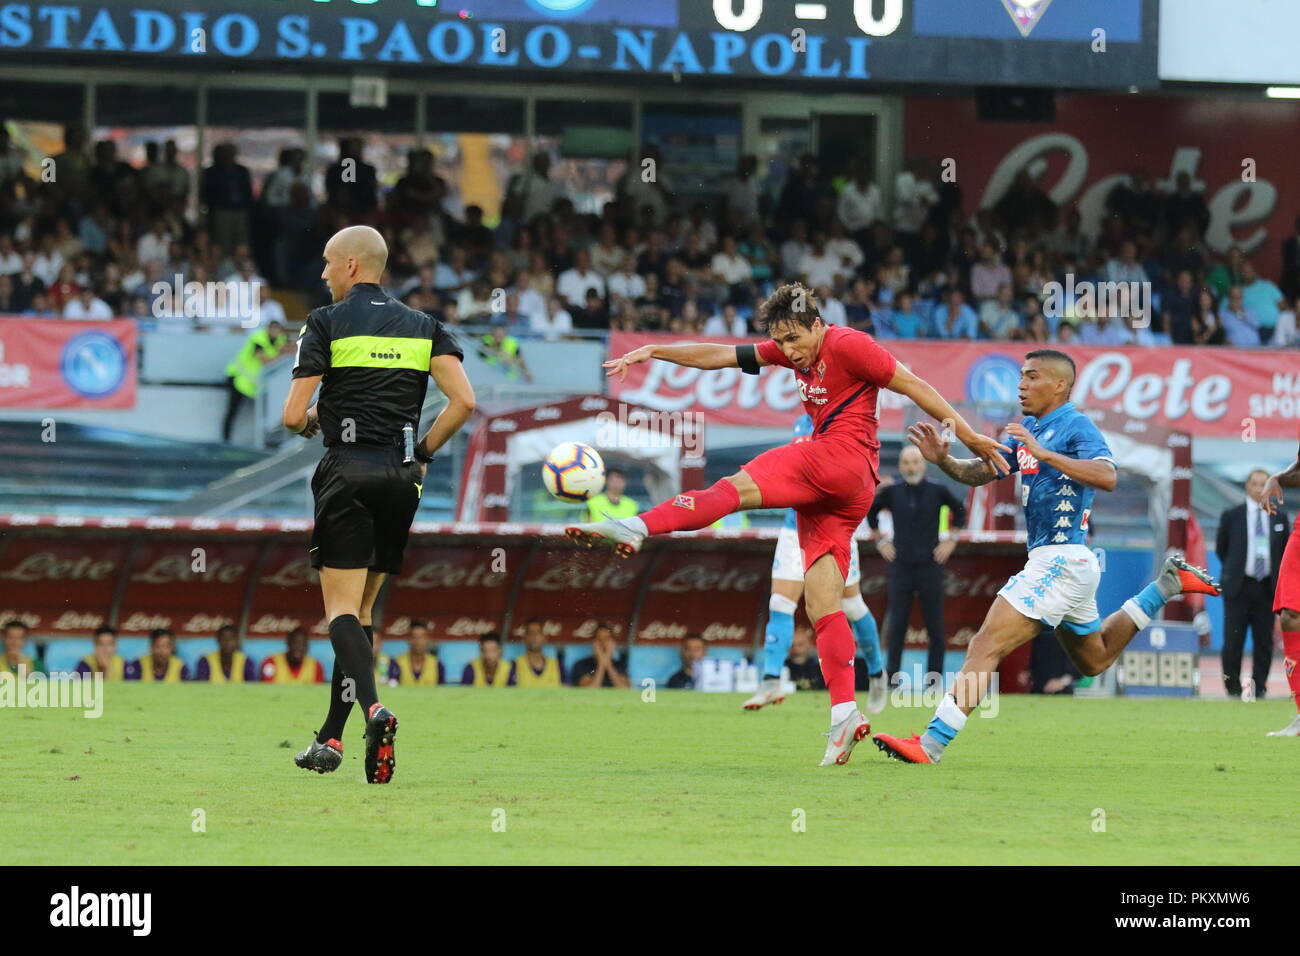 Naples, Italy. 15th September 2018. . In the picture: the champion of the Florentine de la national Italian football club.Stadium San Paolo Naples - 09/15/2018 - Italy.final result SSC Napoli 1 AC Fiorentina 0. Credit: Fabio Sasso/ZUMA Wire/Alamy Live News Stock Photo